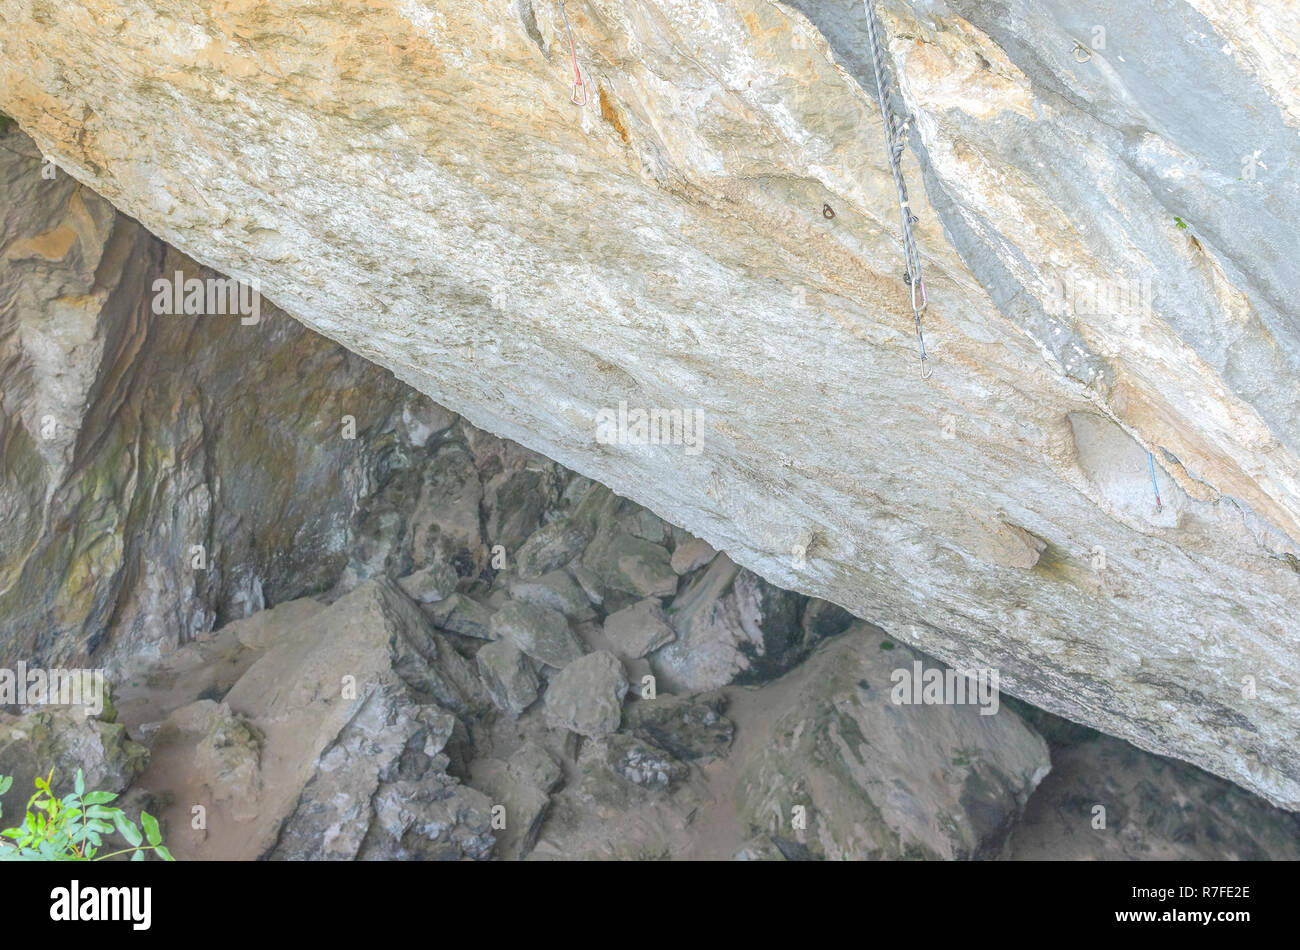 Natural climbing wall at the hillside of a rocky mountain. Carabiners ready to be used by the climbers. Soft background. Shaded spot area Stock Photo